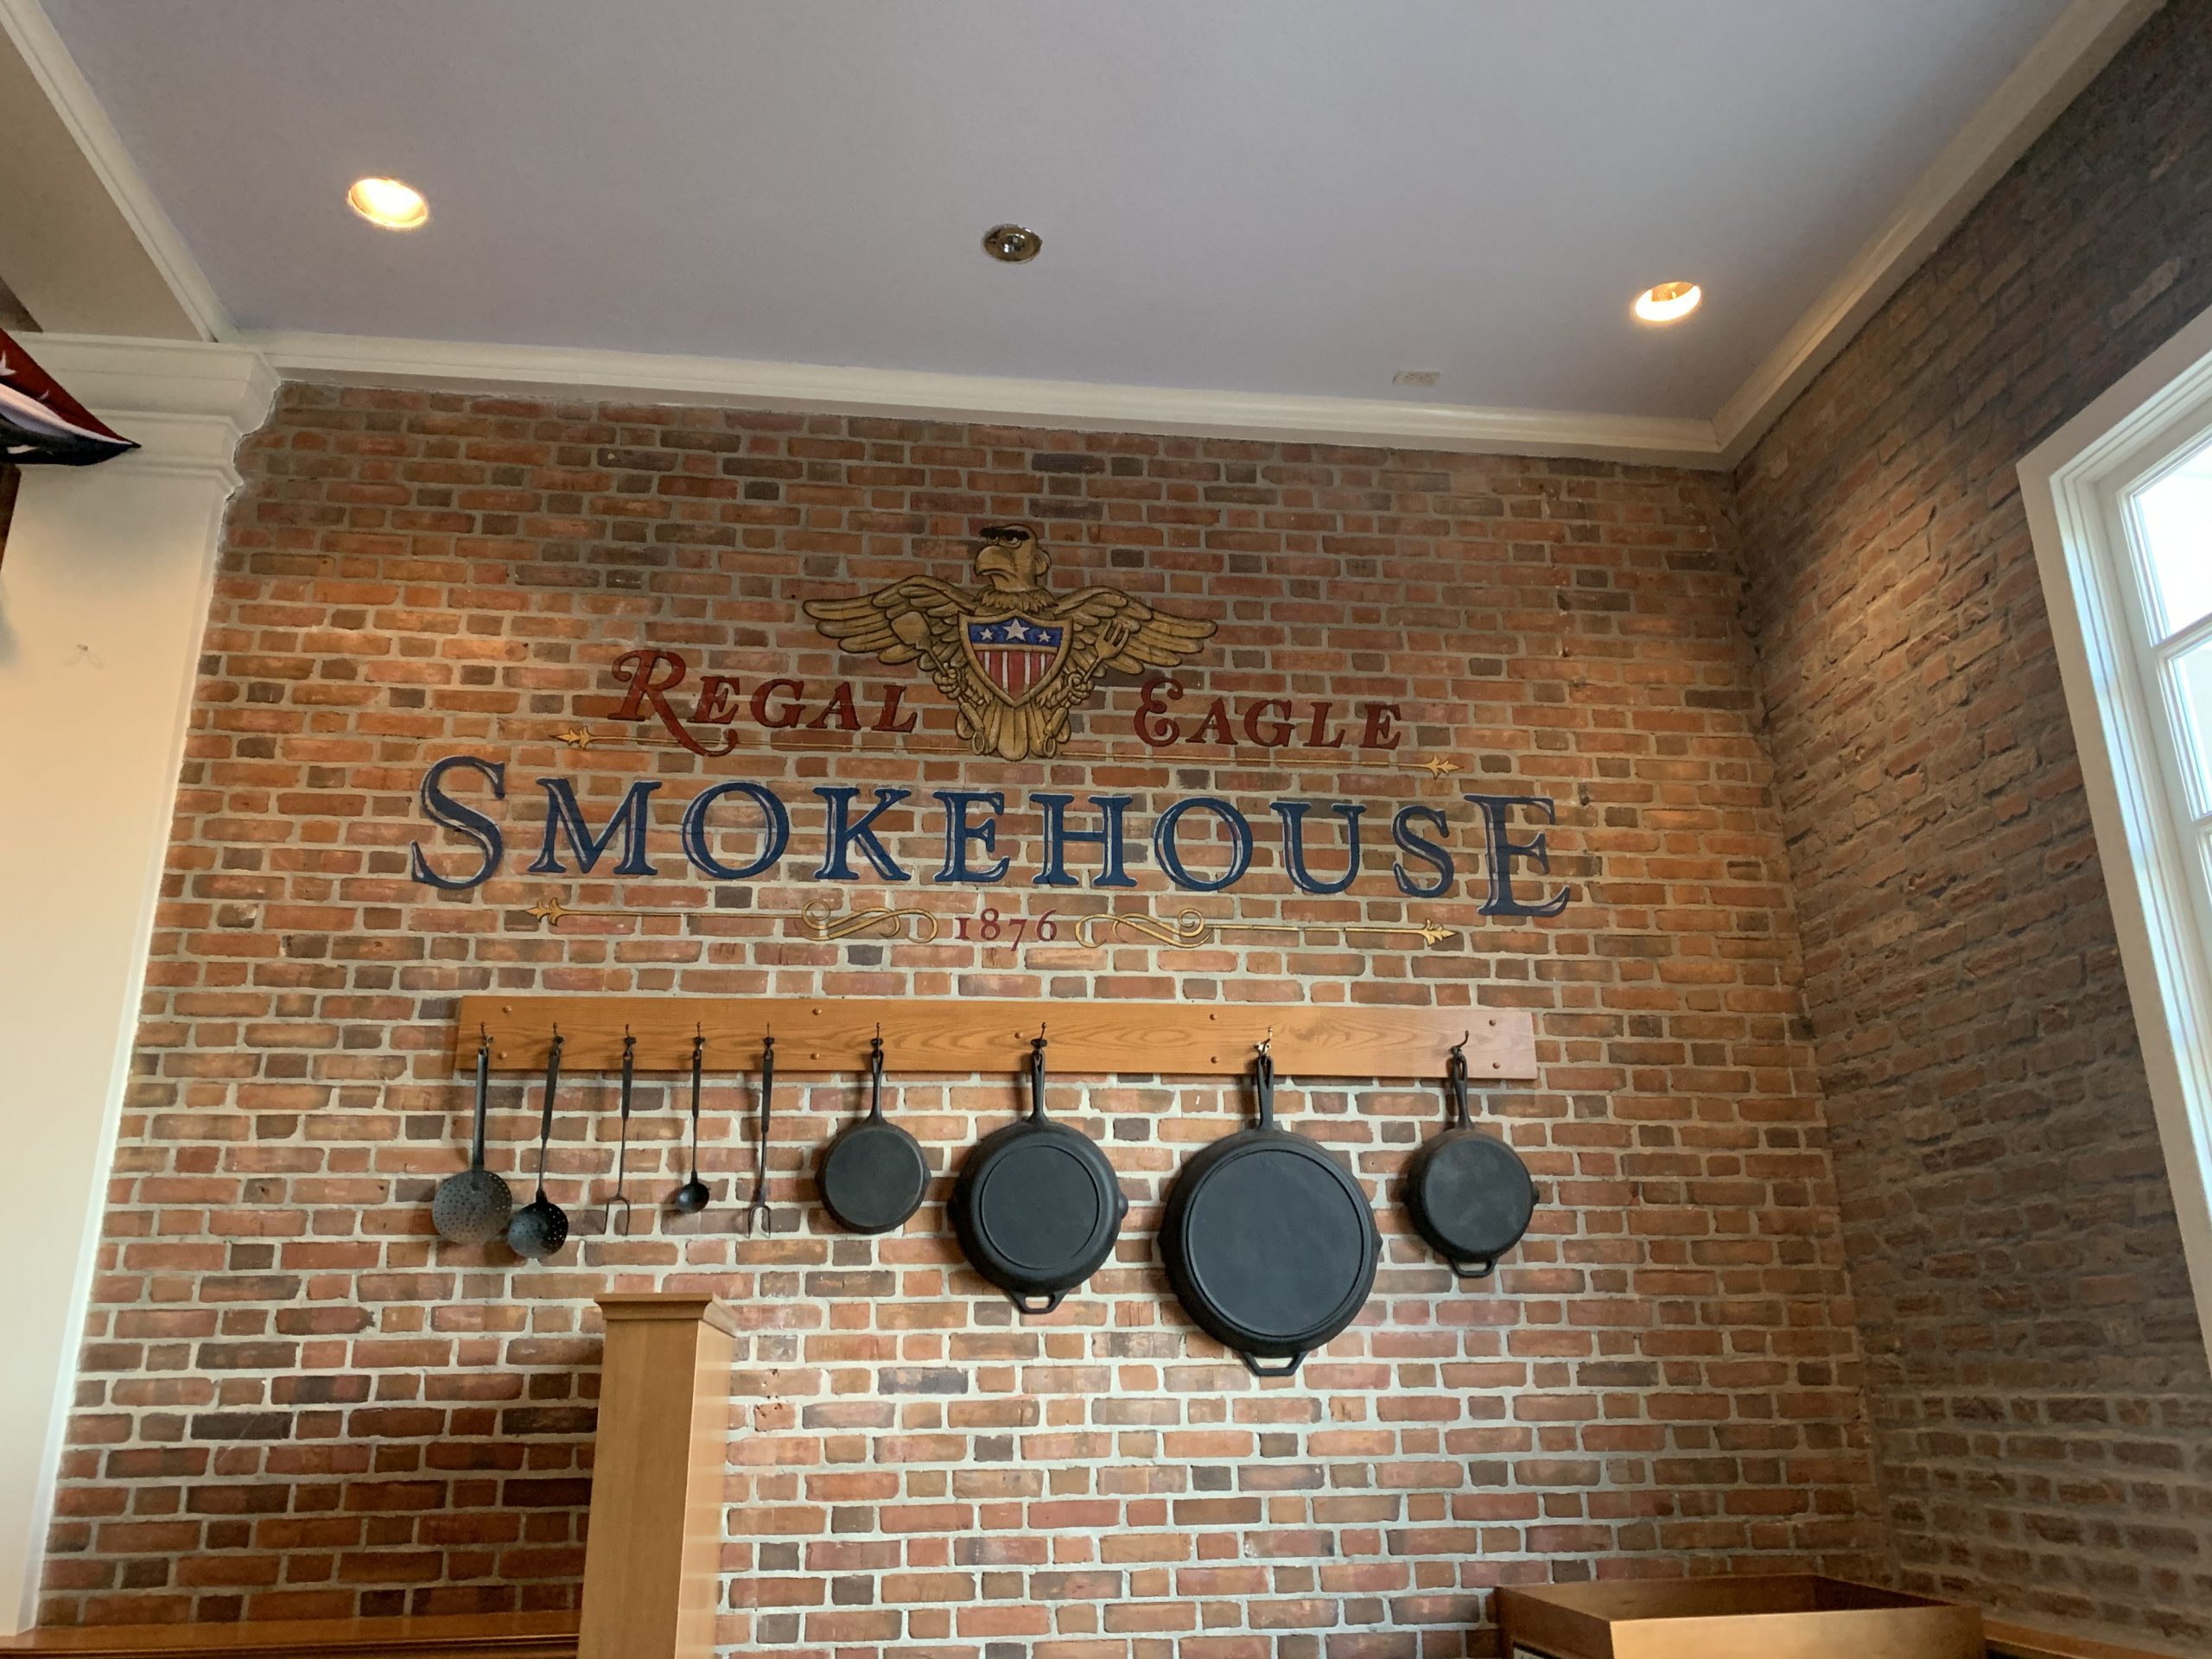 The Regal Eagle Smokehouse: Craft Drafts & Barbecue is Finally Open